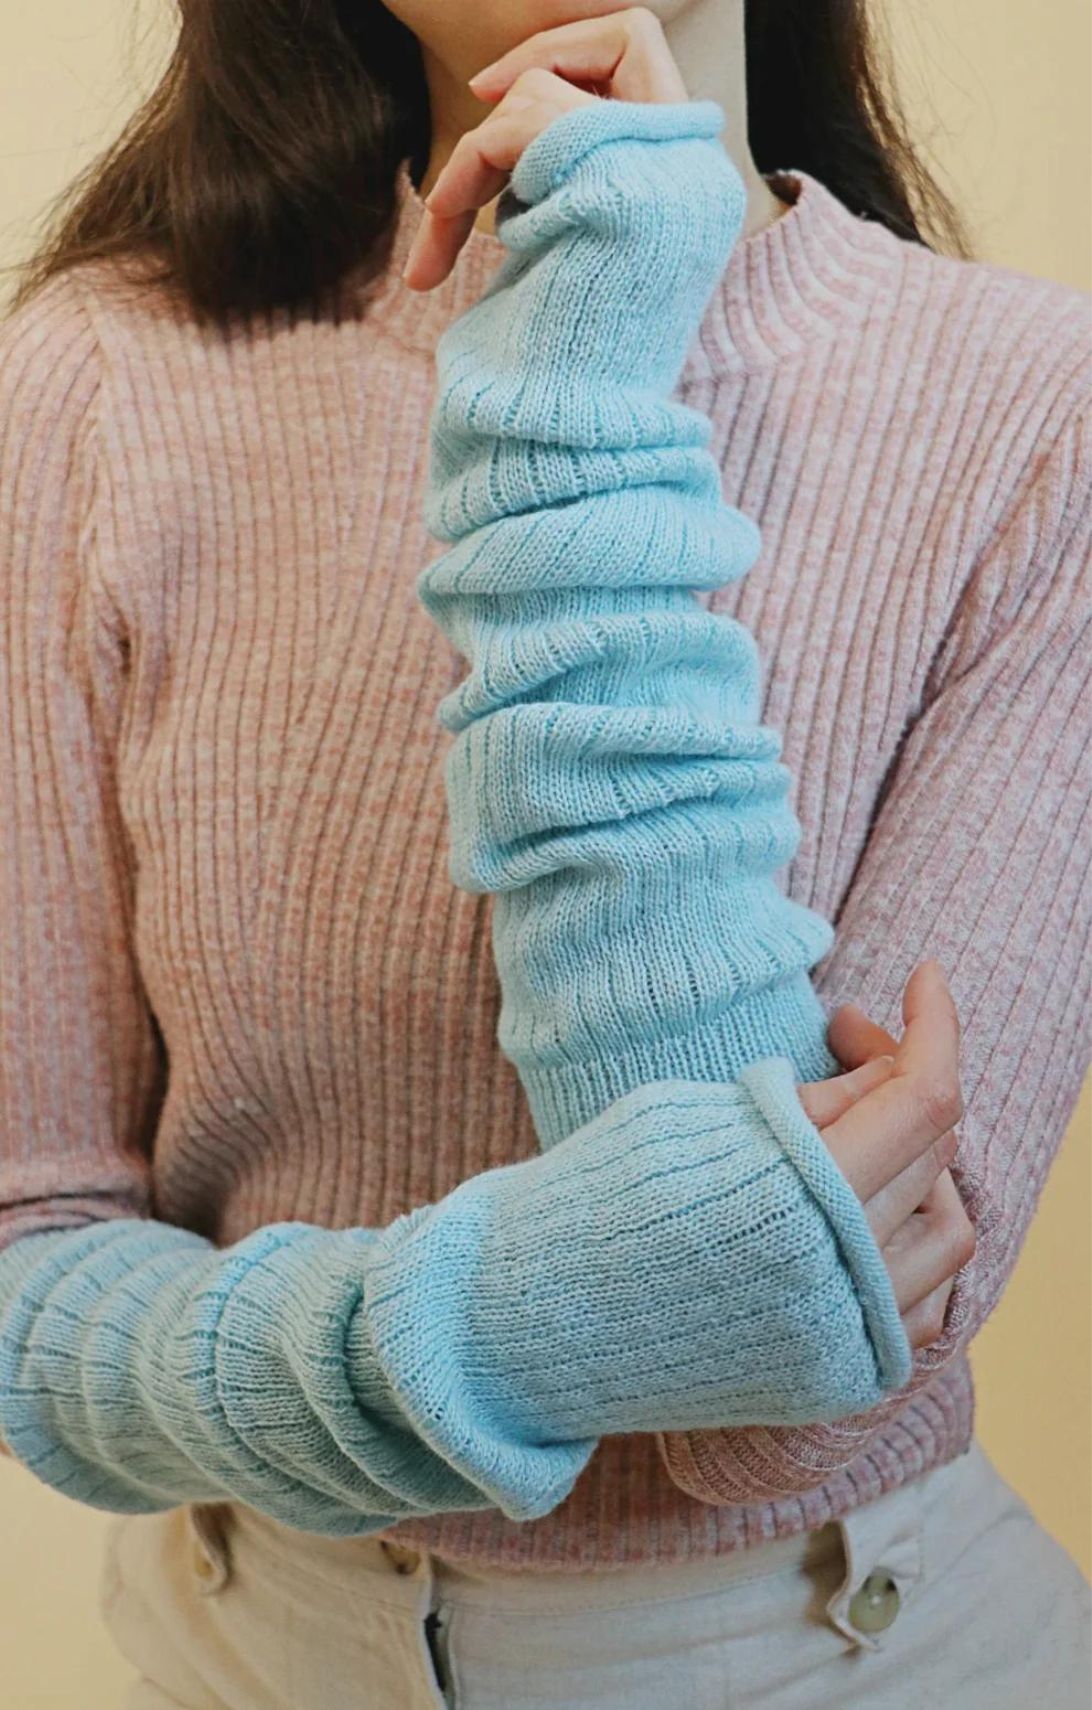 Arm of a woman wearing an ivory-colored sweater wearing the Powder Blue color of a product called Wool Blend Leg and Arm Warmers of the TABBISOCKS brand